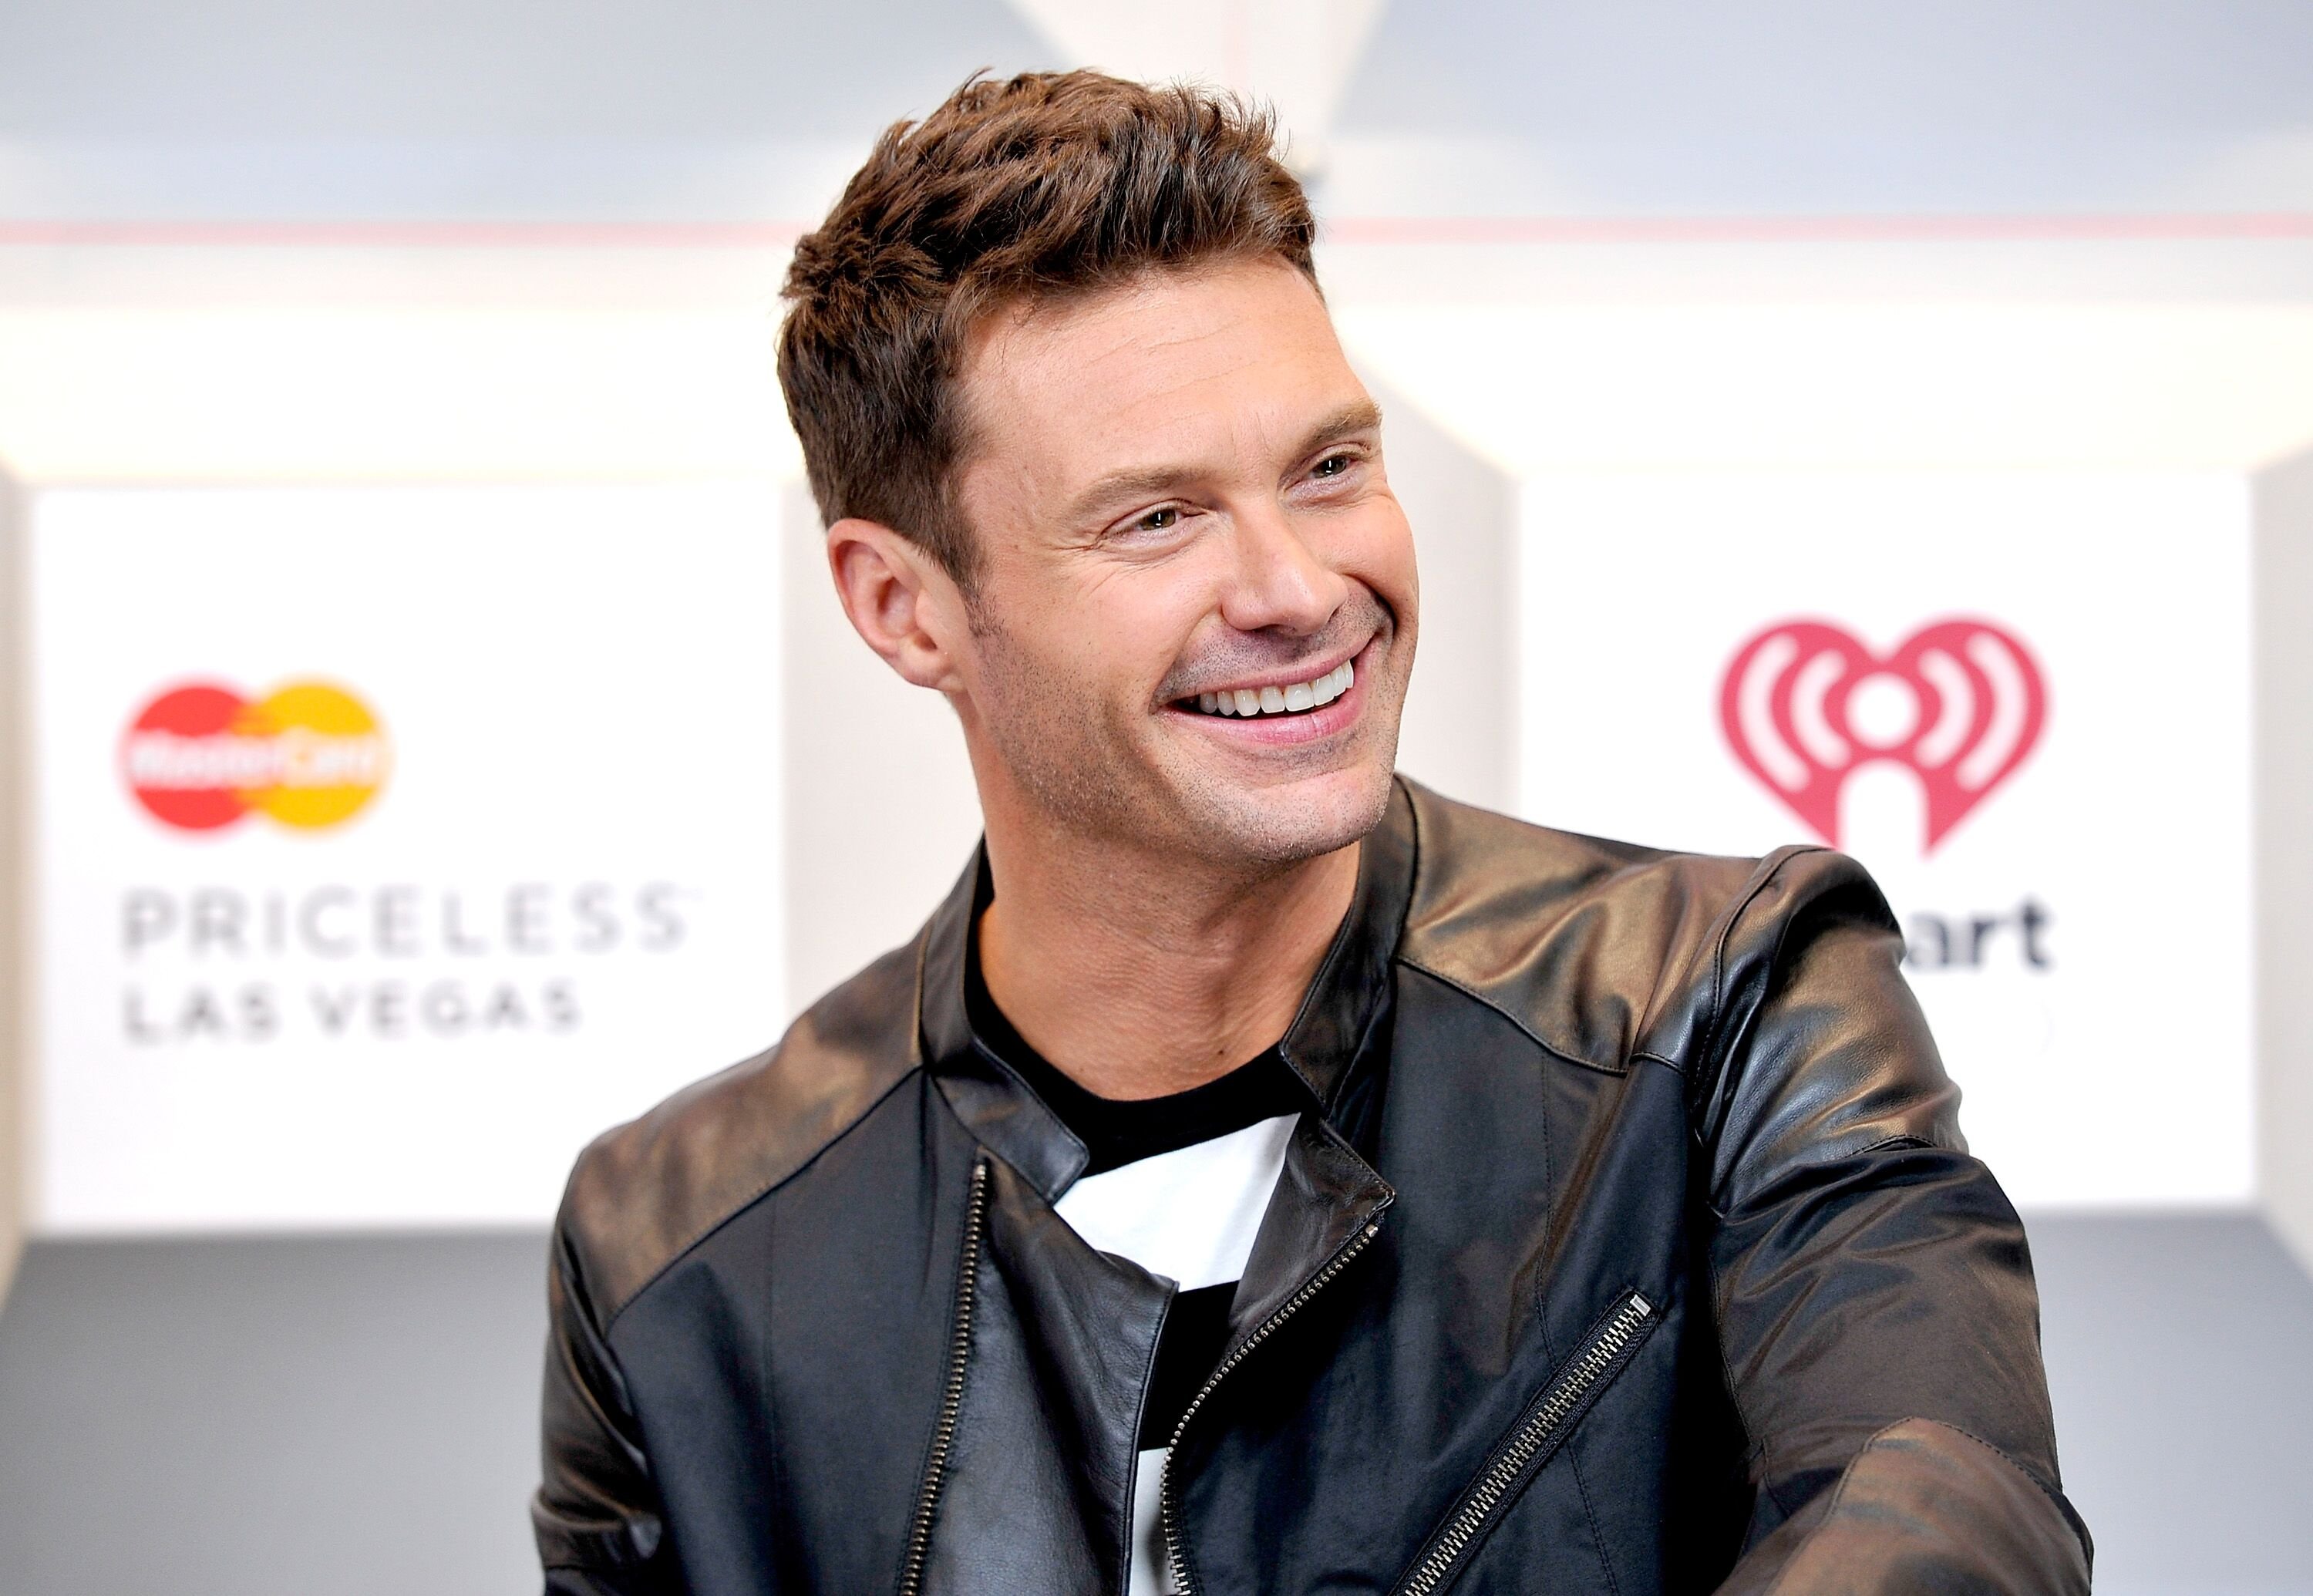 Ryan Seacrest attends the 2014 iHeartRadio Music Festival at the MGM Grand Garden Arena on September 19, 2014. | Source: Getty Images